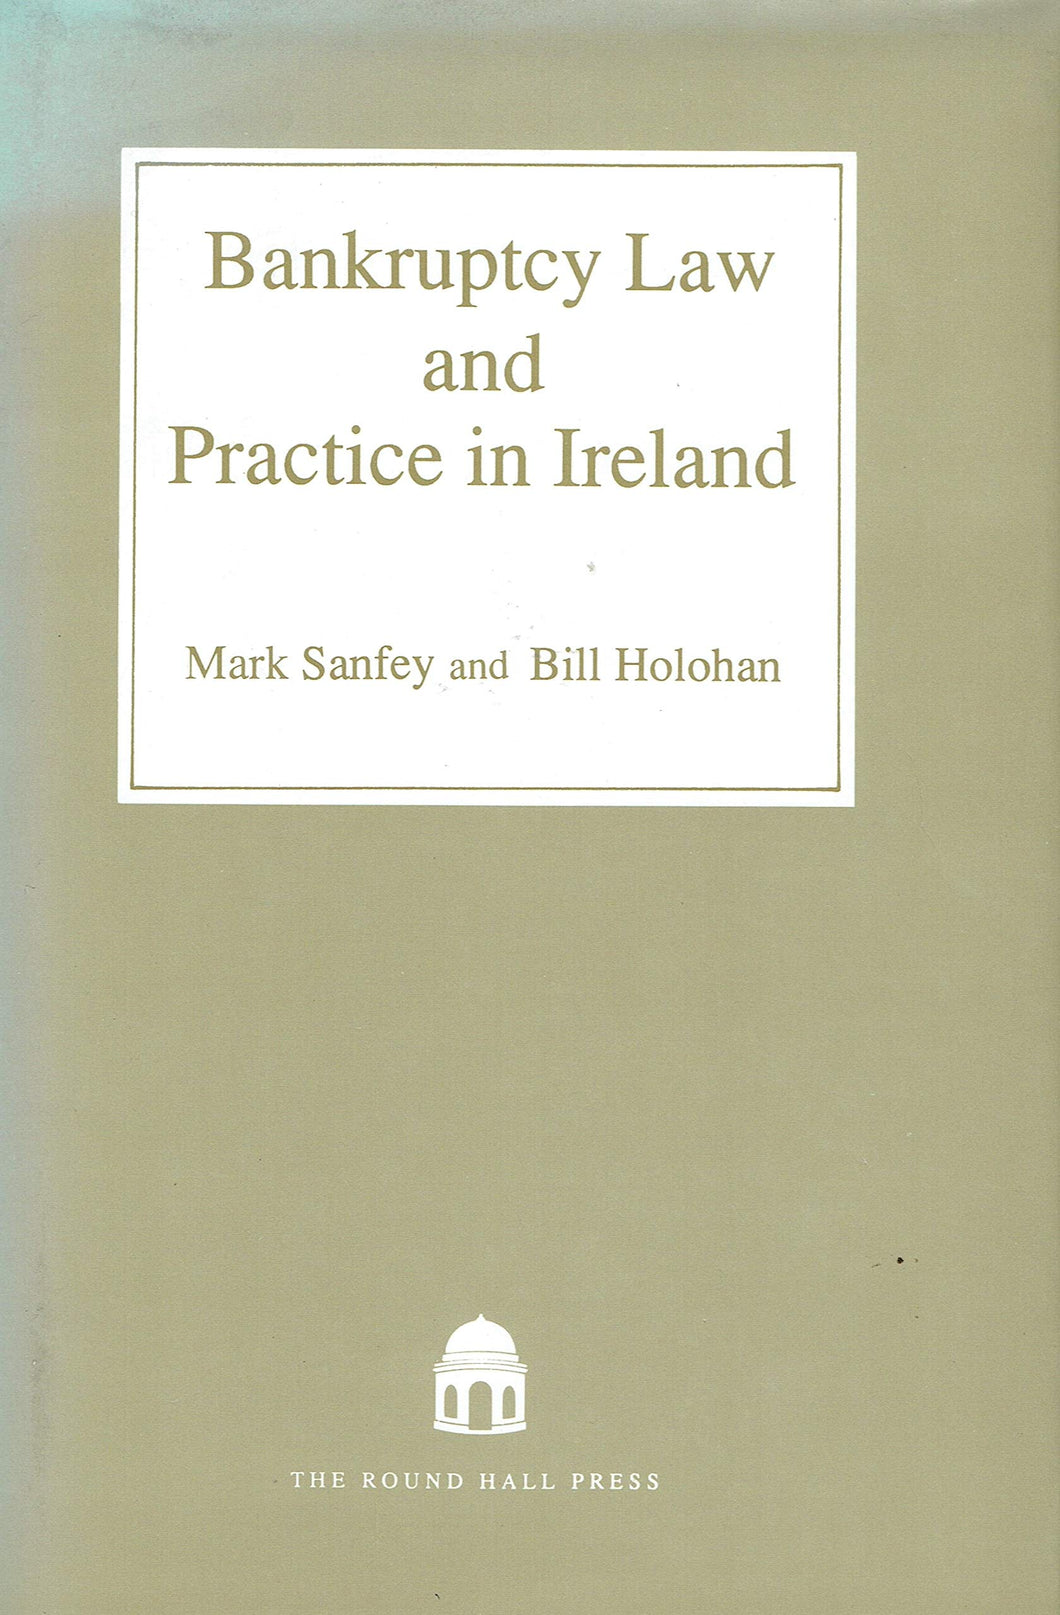 Bankruptcy Law and Practice in Ireland